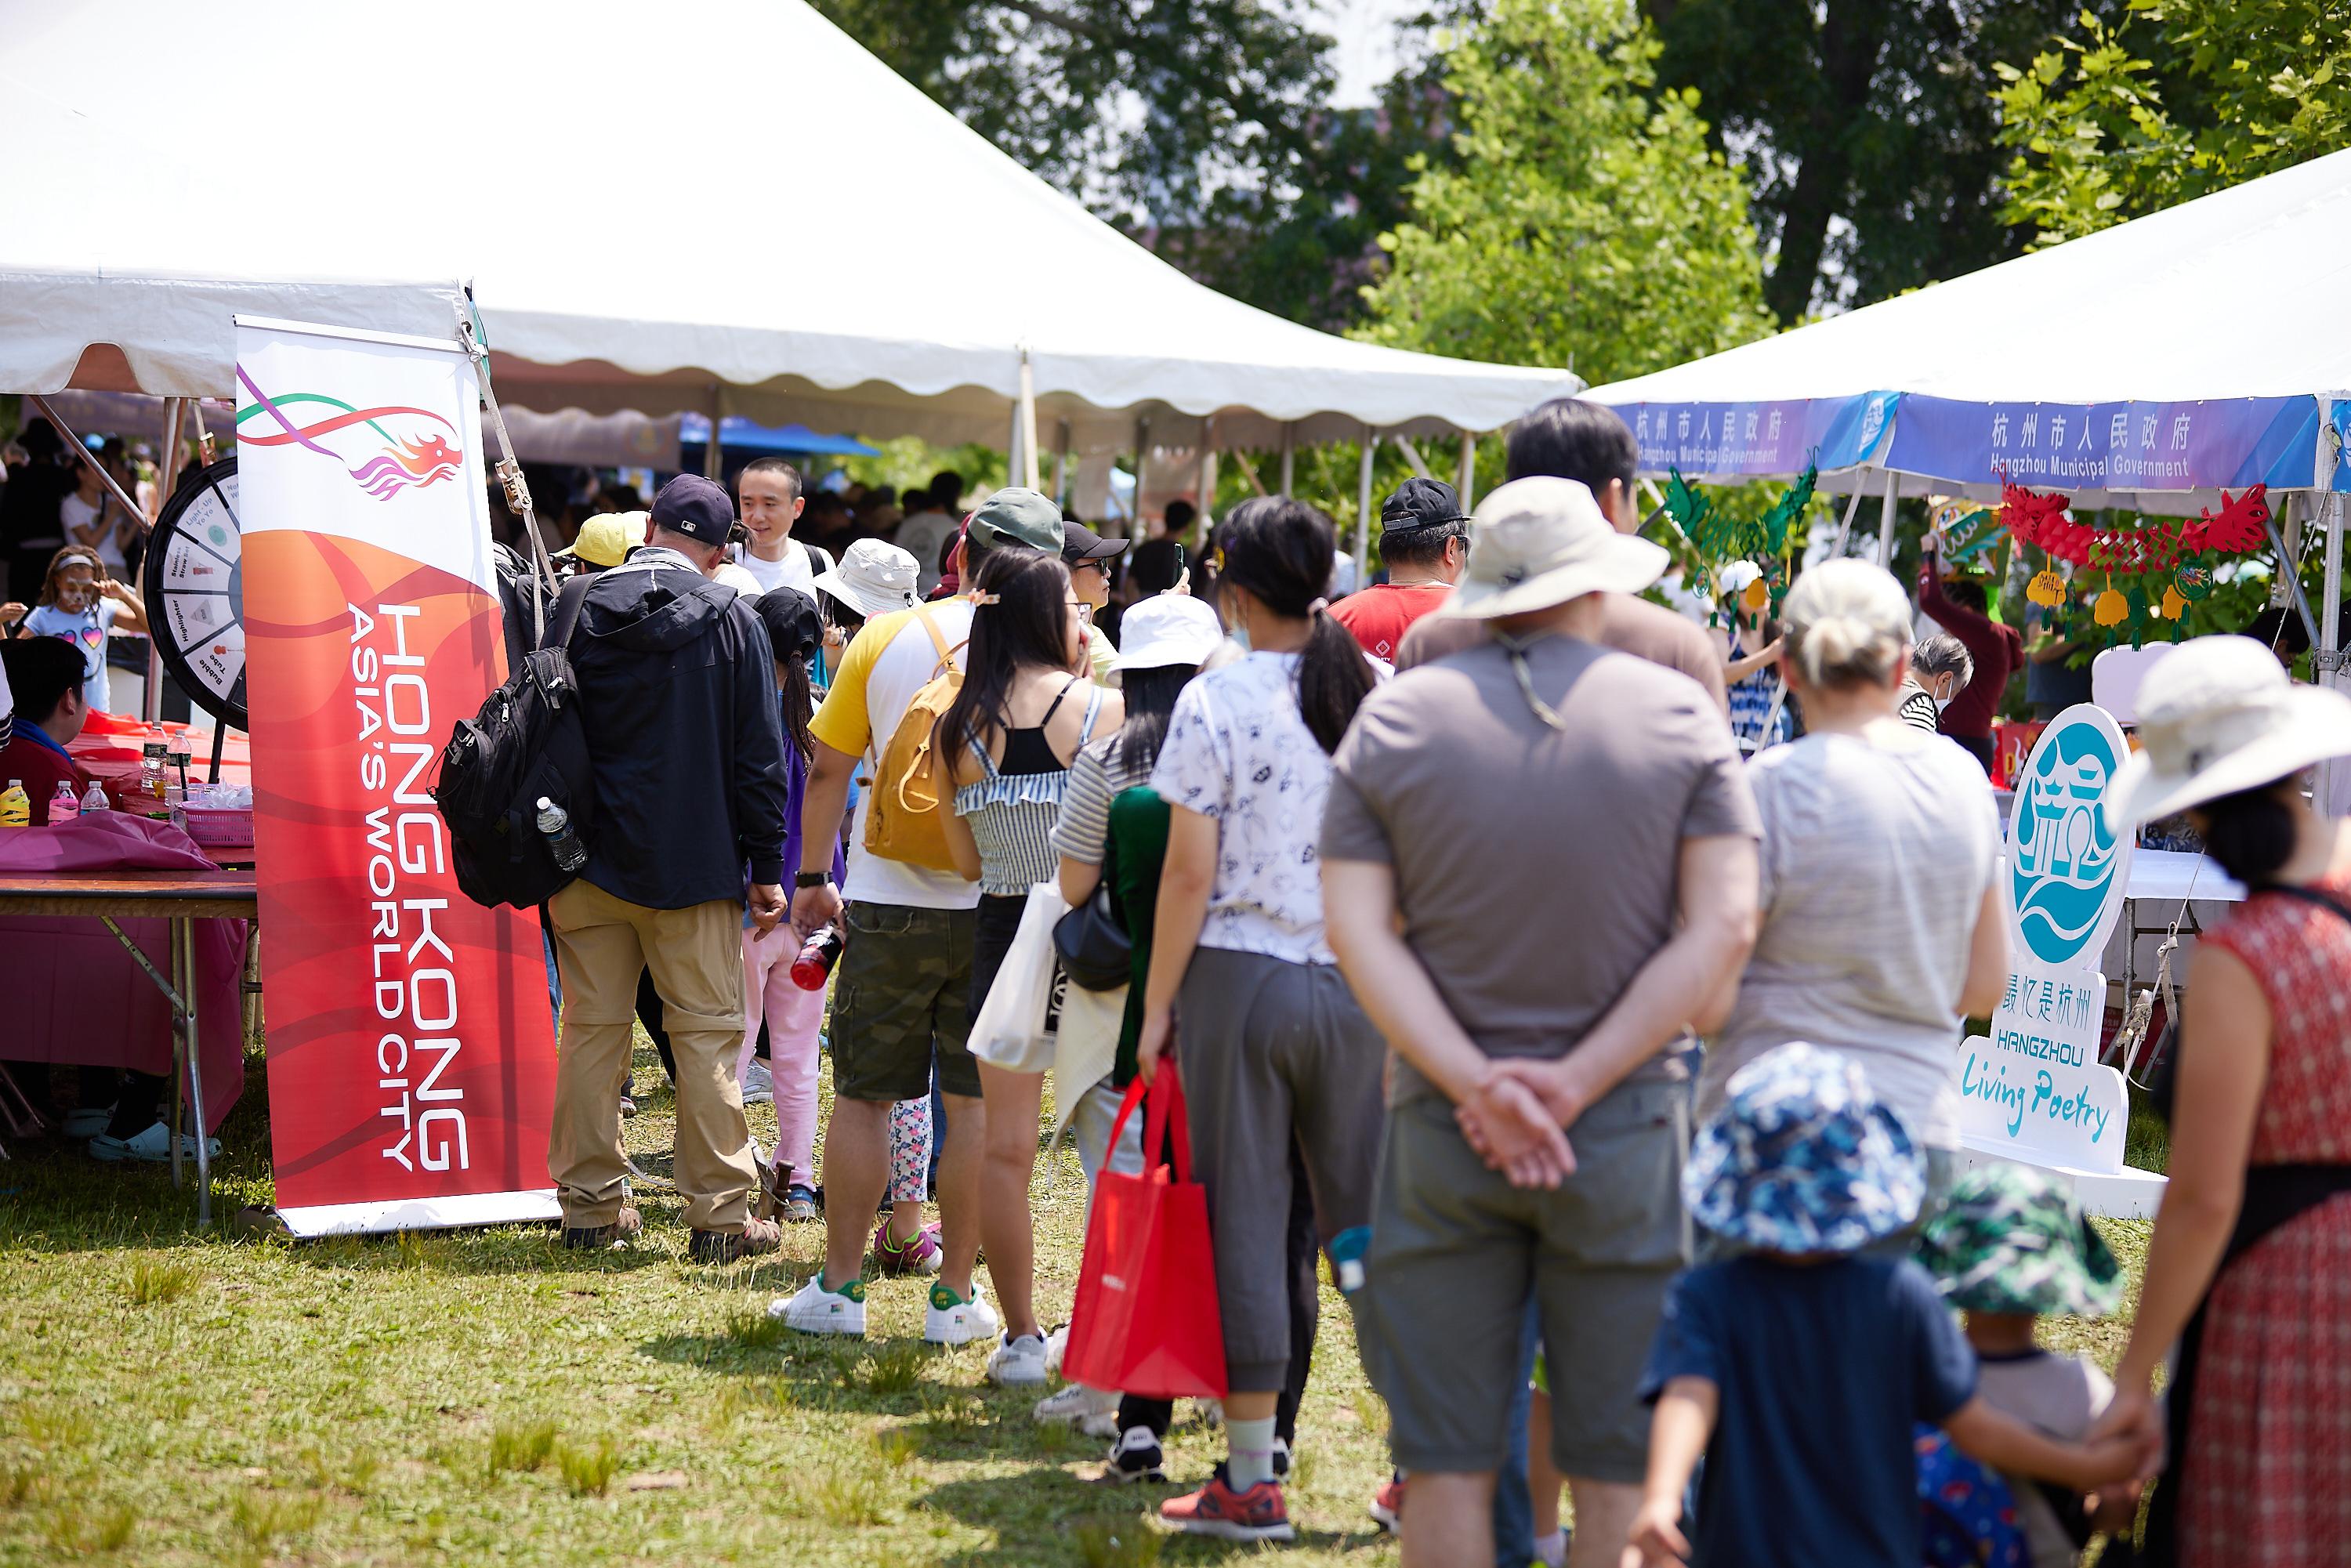 The Hong Kong Economic and Trade Office in New York set up a game booth today (June 11, Boston time) at the 44th Boston Hong Kong Dragon Boat Festival, which attracted over 50 000 revelers.